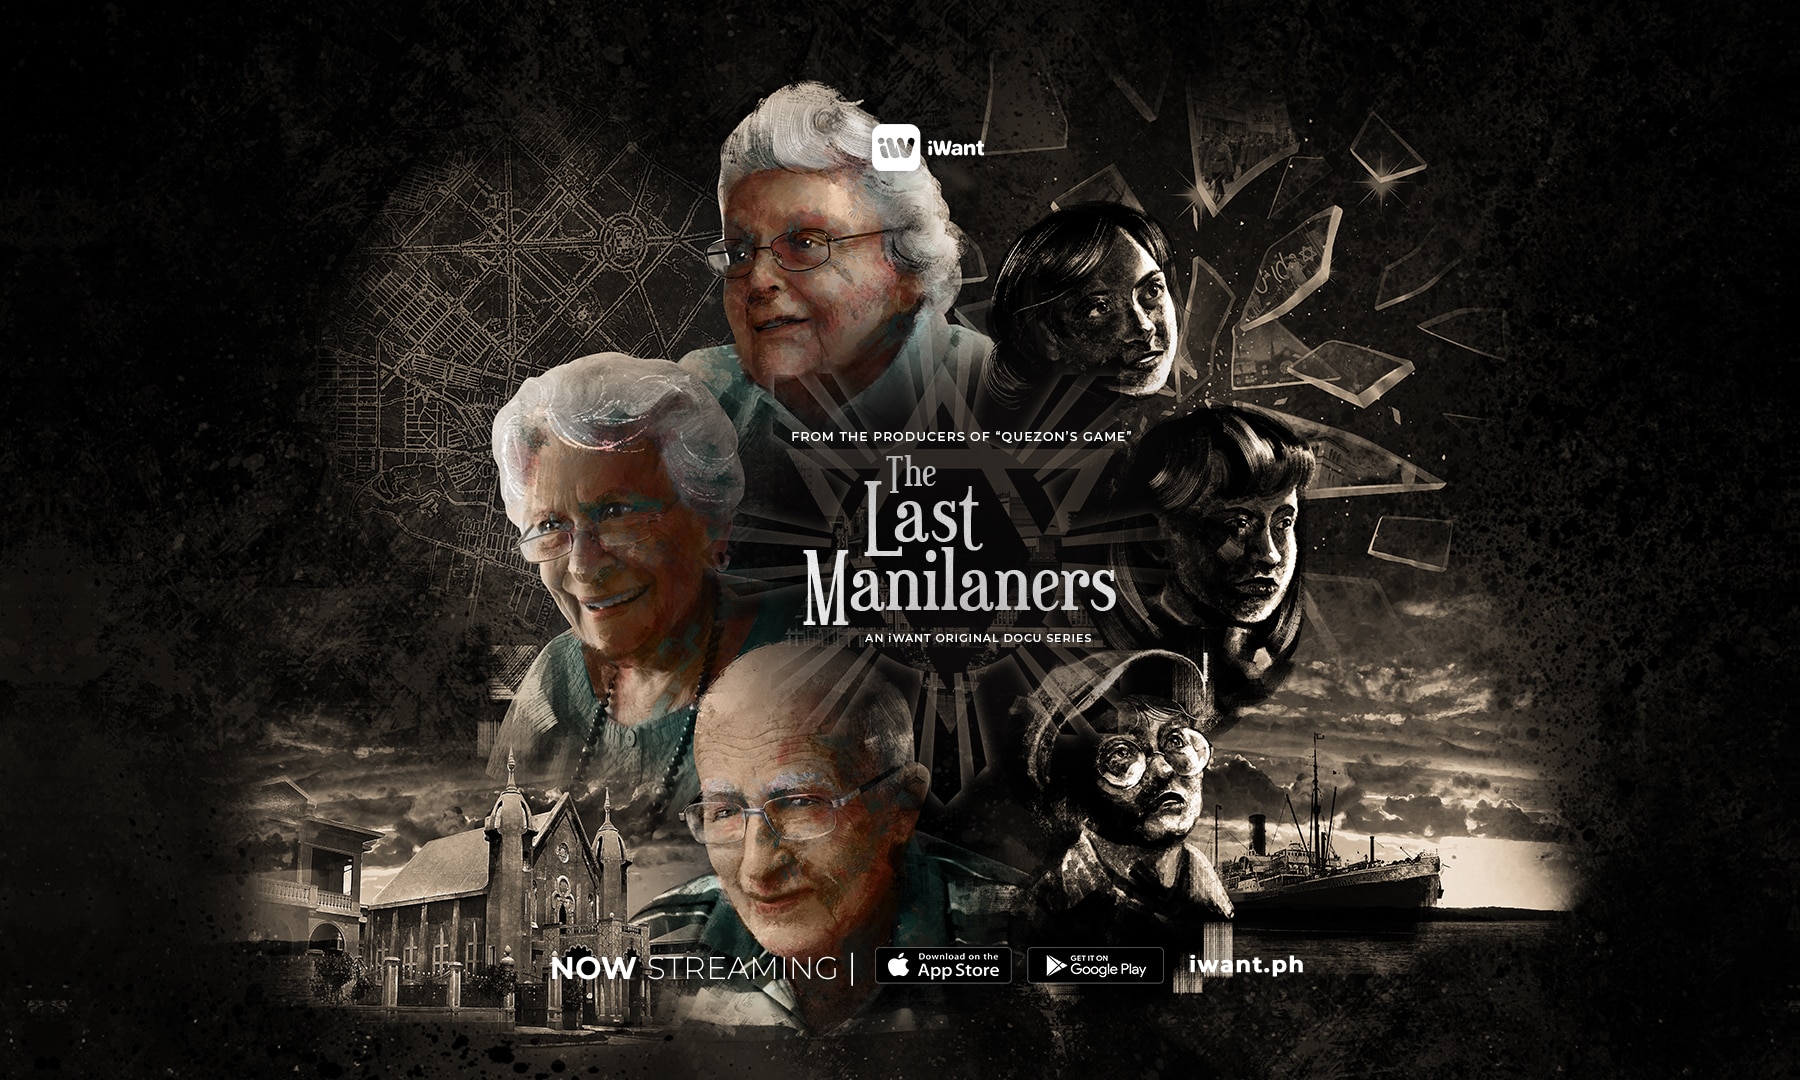 Holocaust survivors rescued by PH share their stories in iWant's "The Last Manilaners"